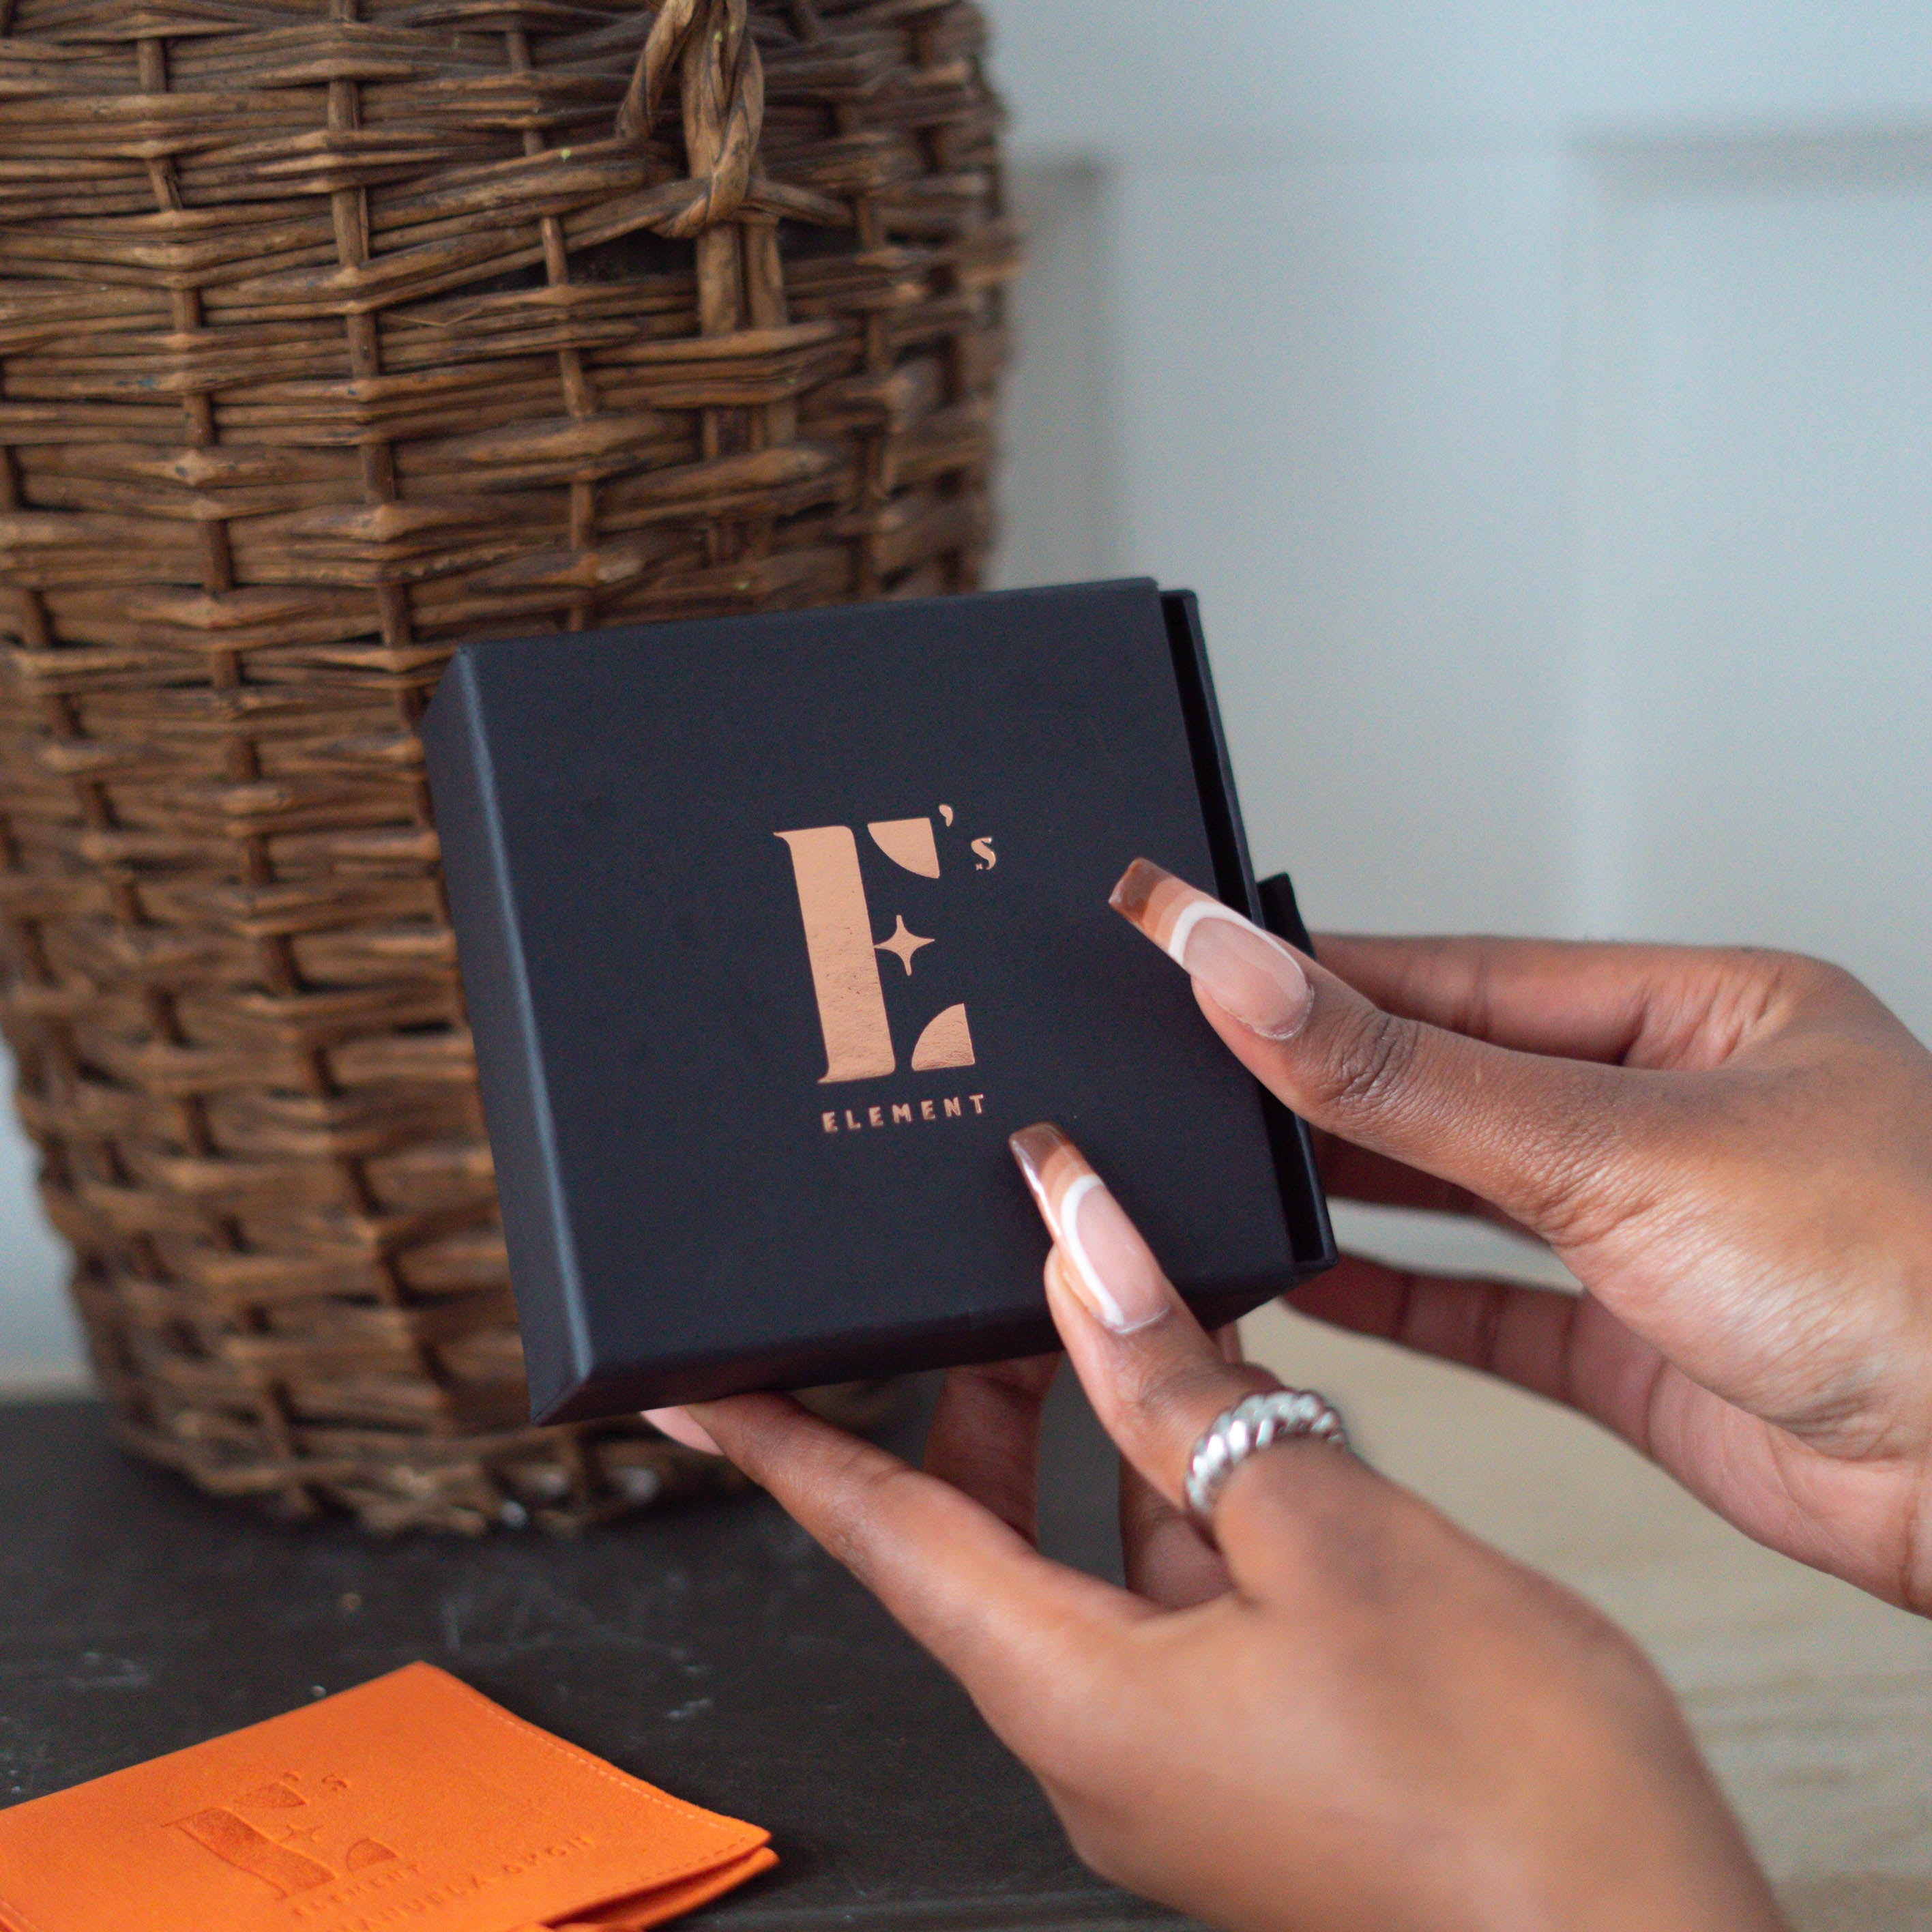 Hands holding an E's Element branded jewlery box